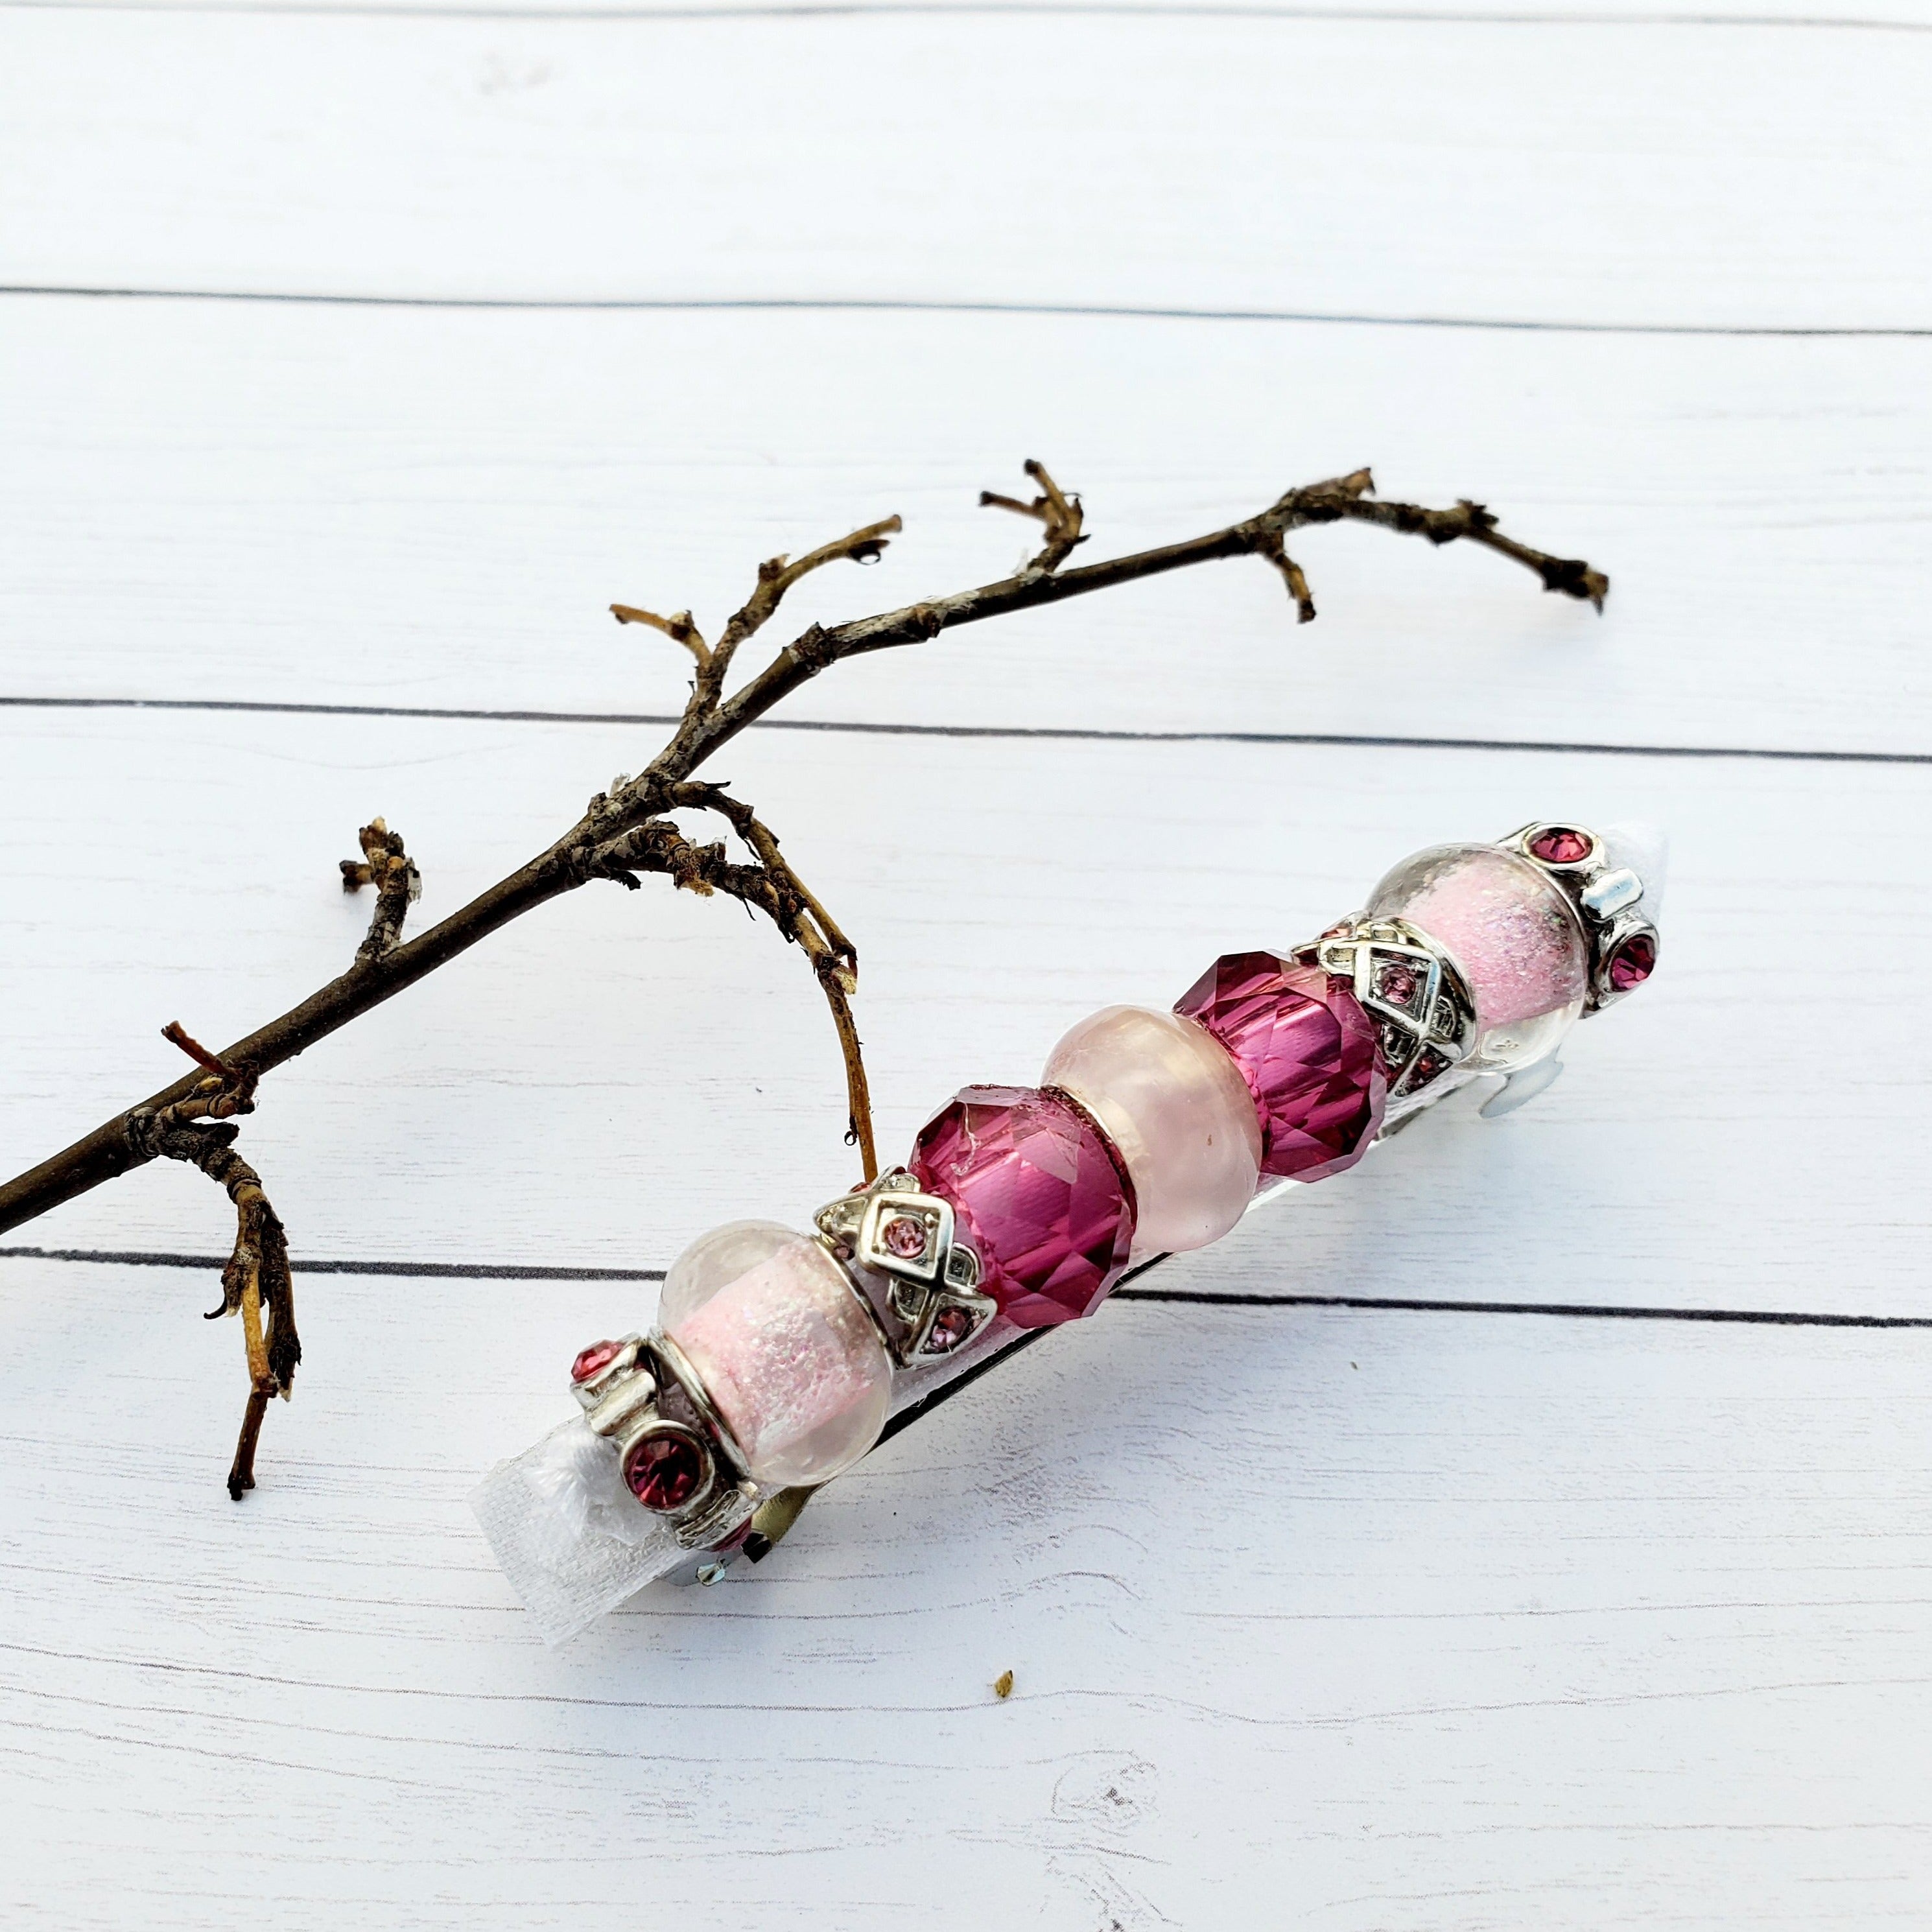 Beaded Metal Lined Glass  Pink  barrettes